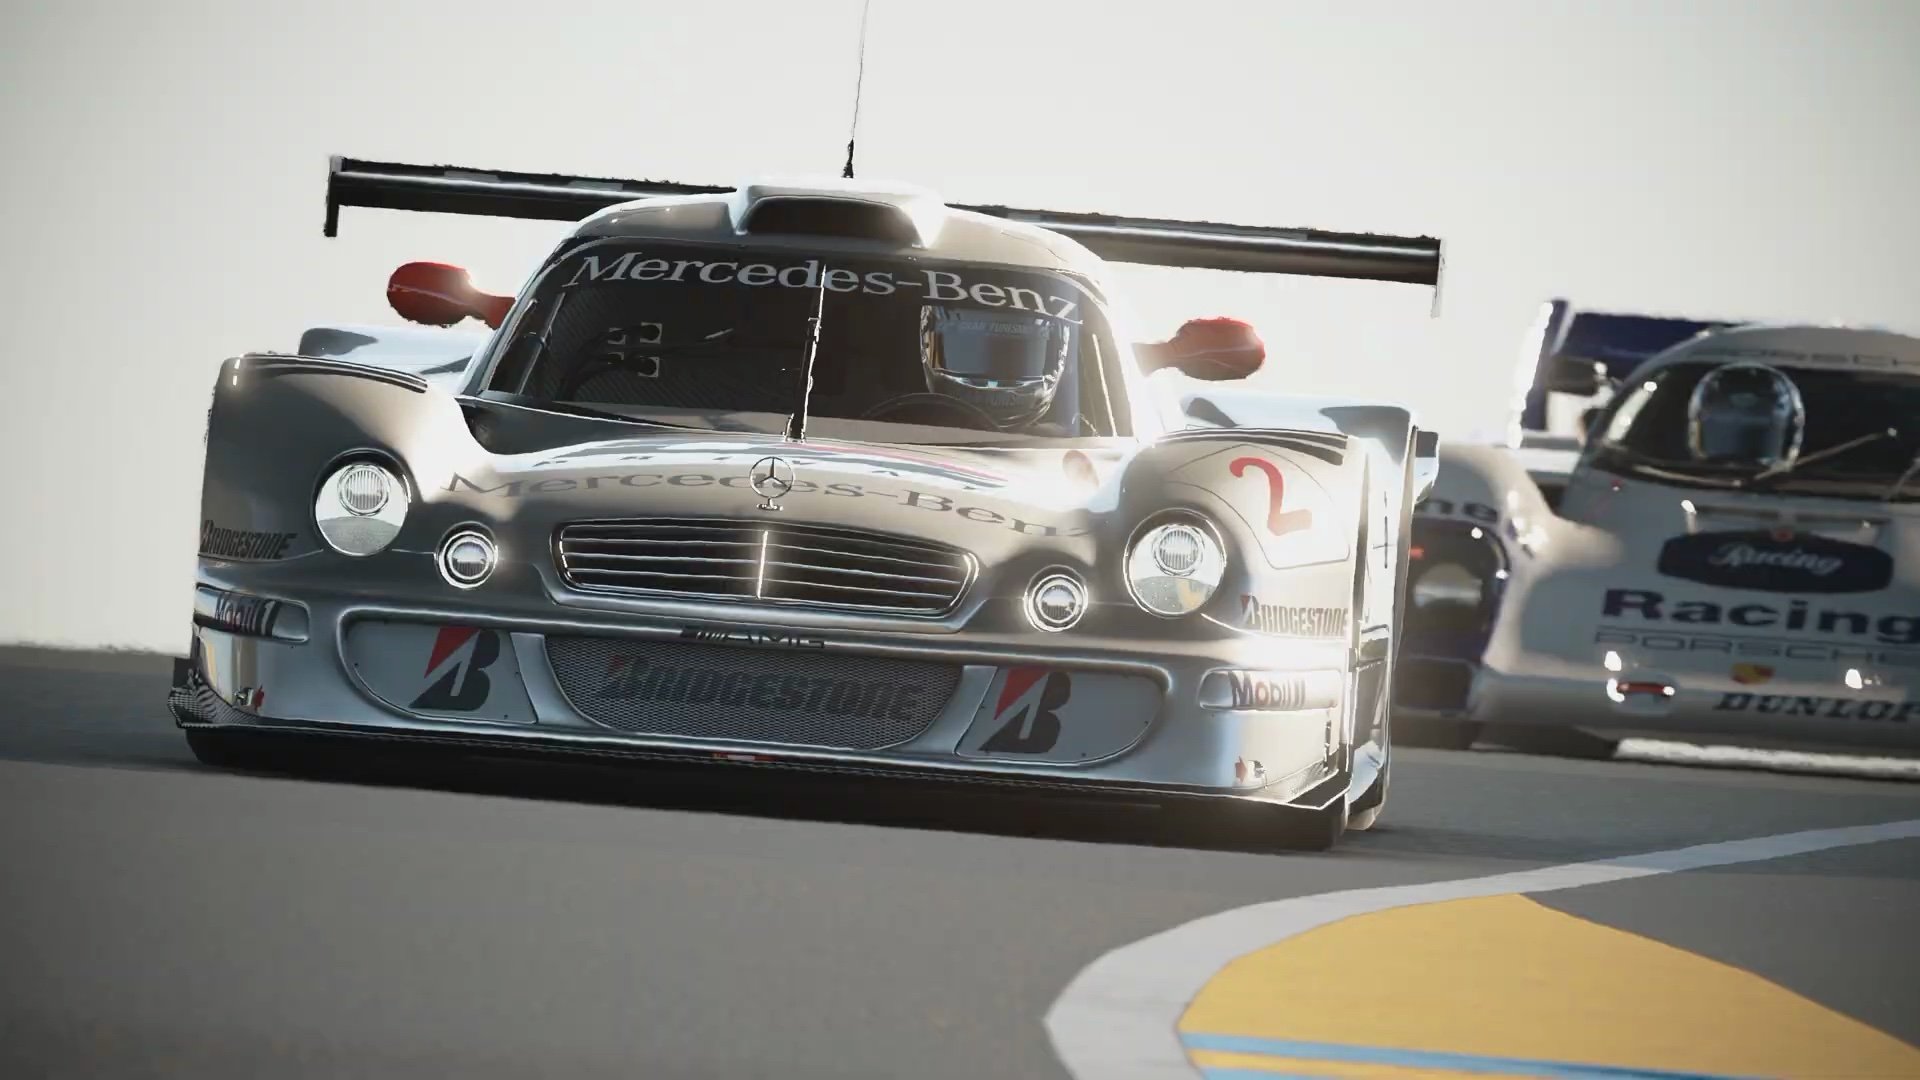 Gran Turismo 7 cross-play confirmed for PS4 and PS5 players